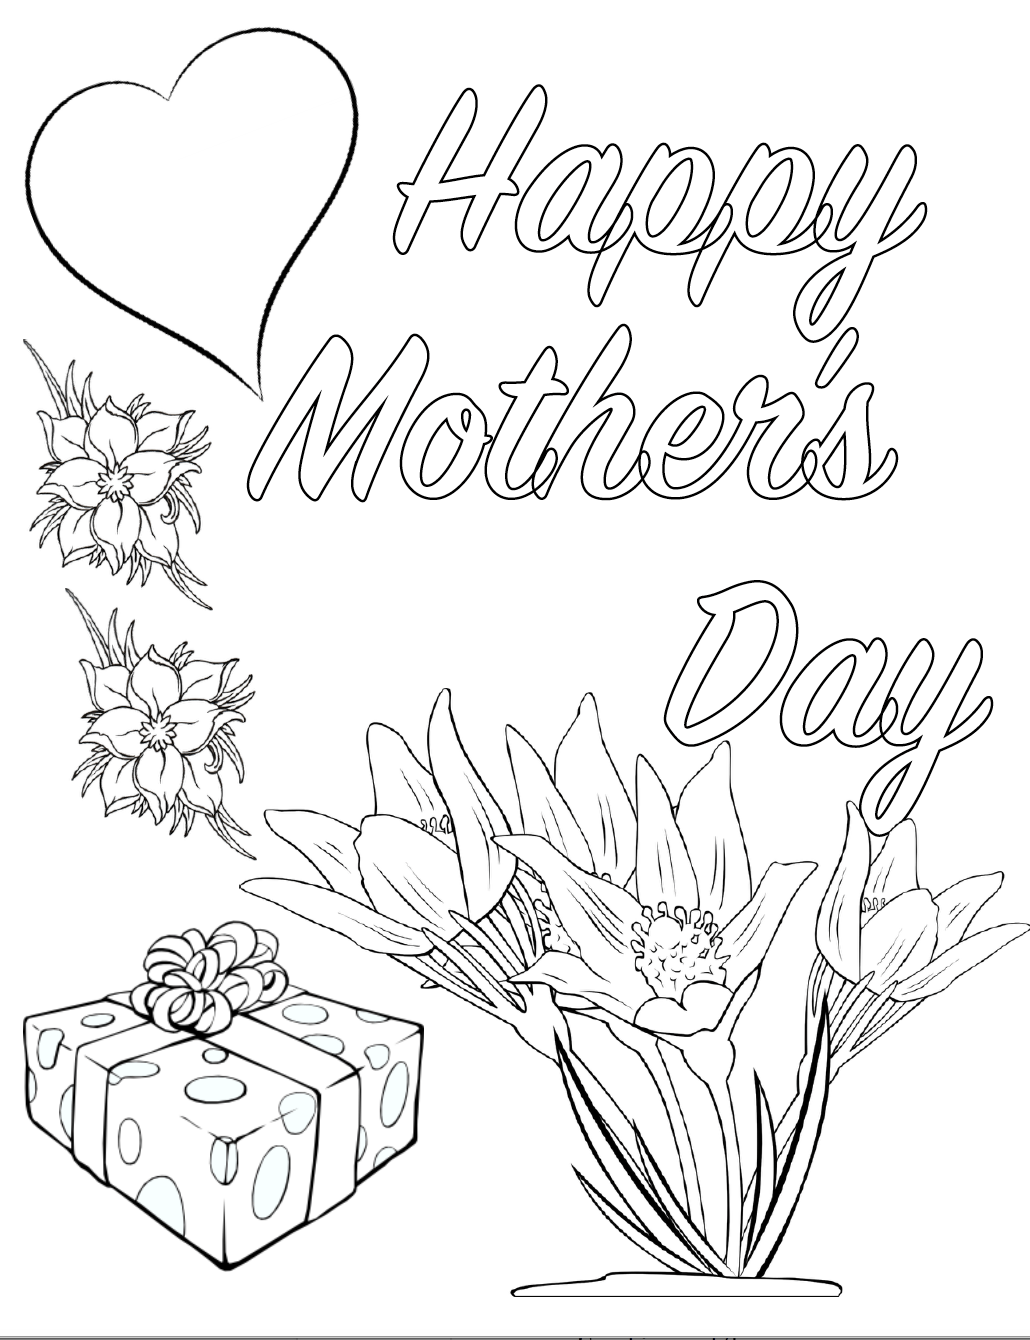 Coloring book of flowers and a gift for mothers day   Drukuj ...